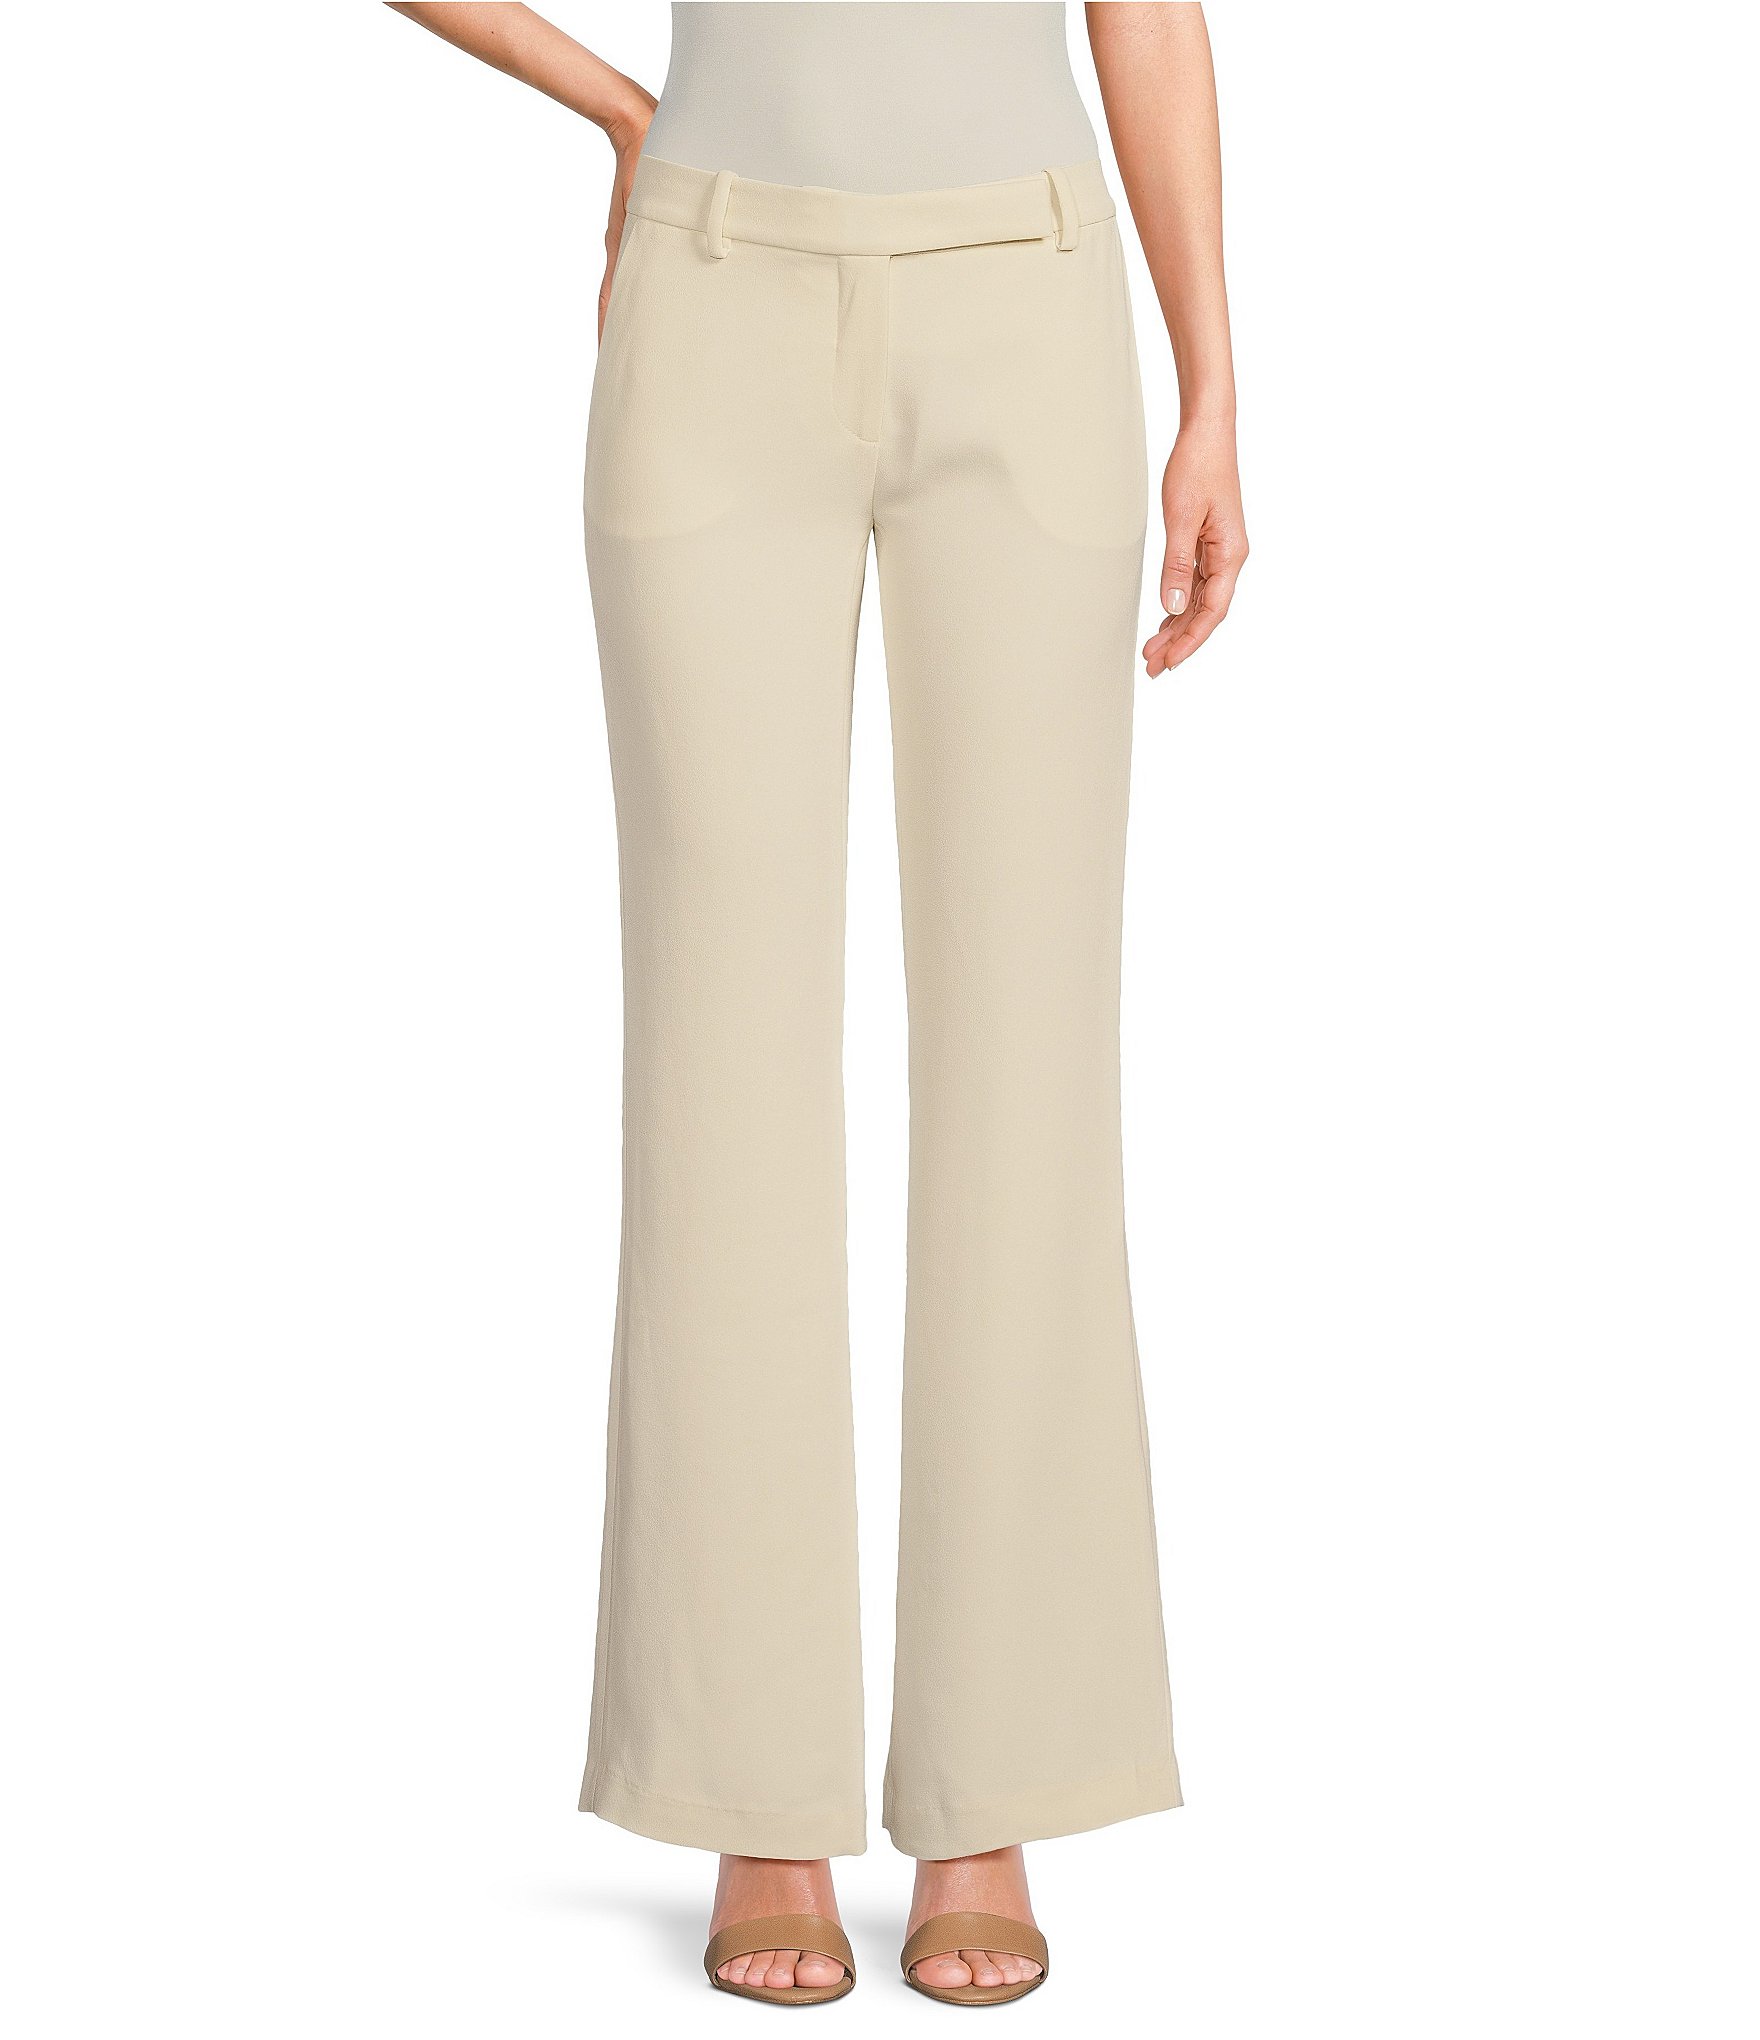 Stretch Crepe Classic Trouser Pant